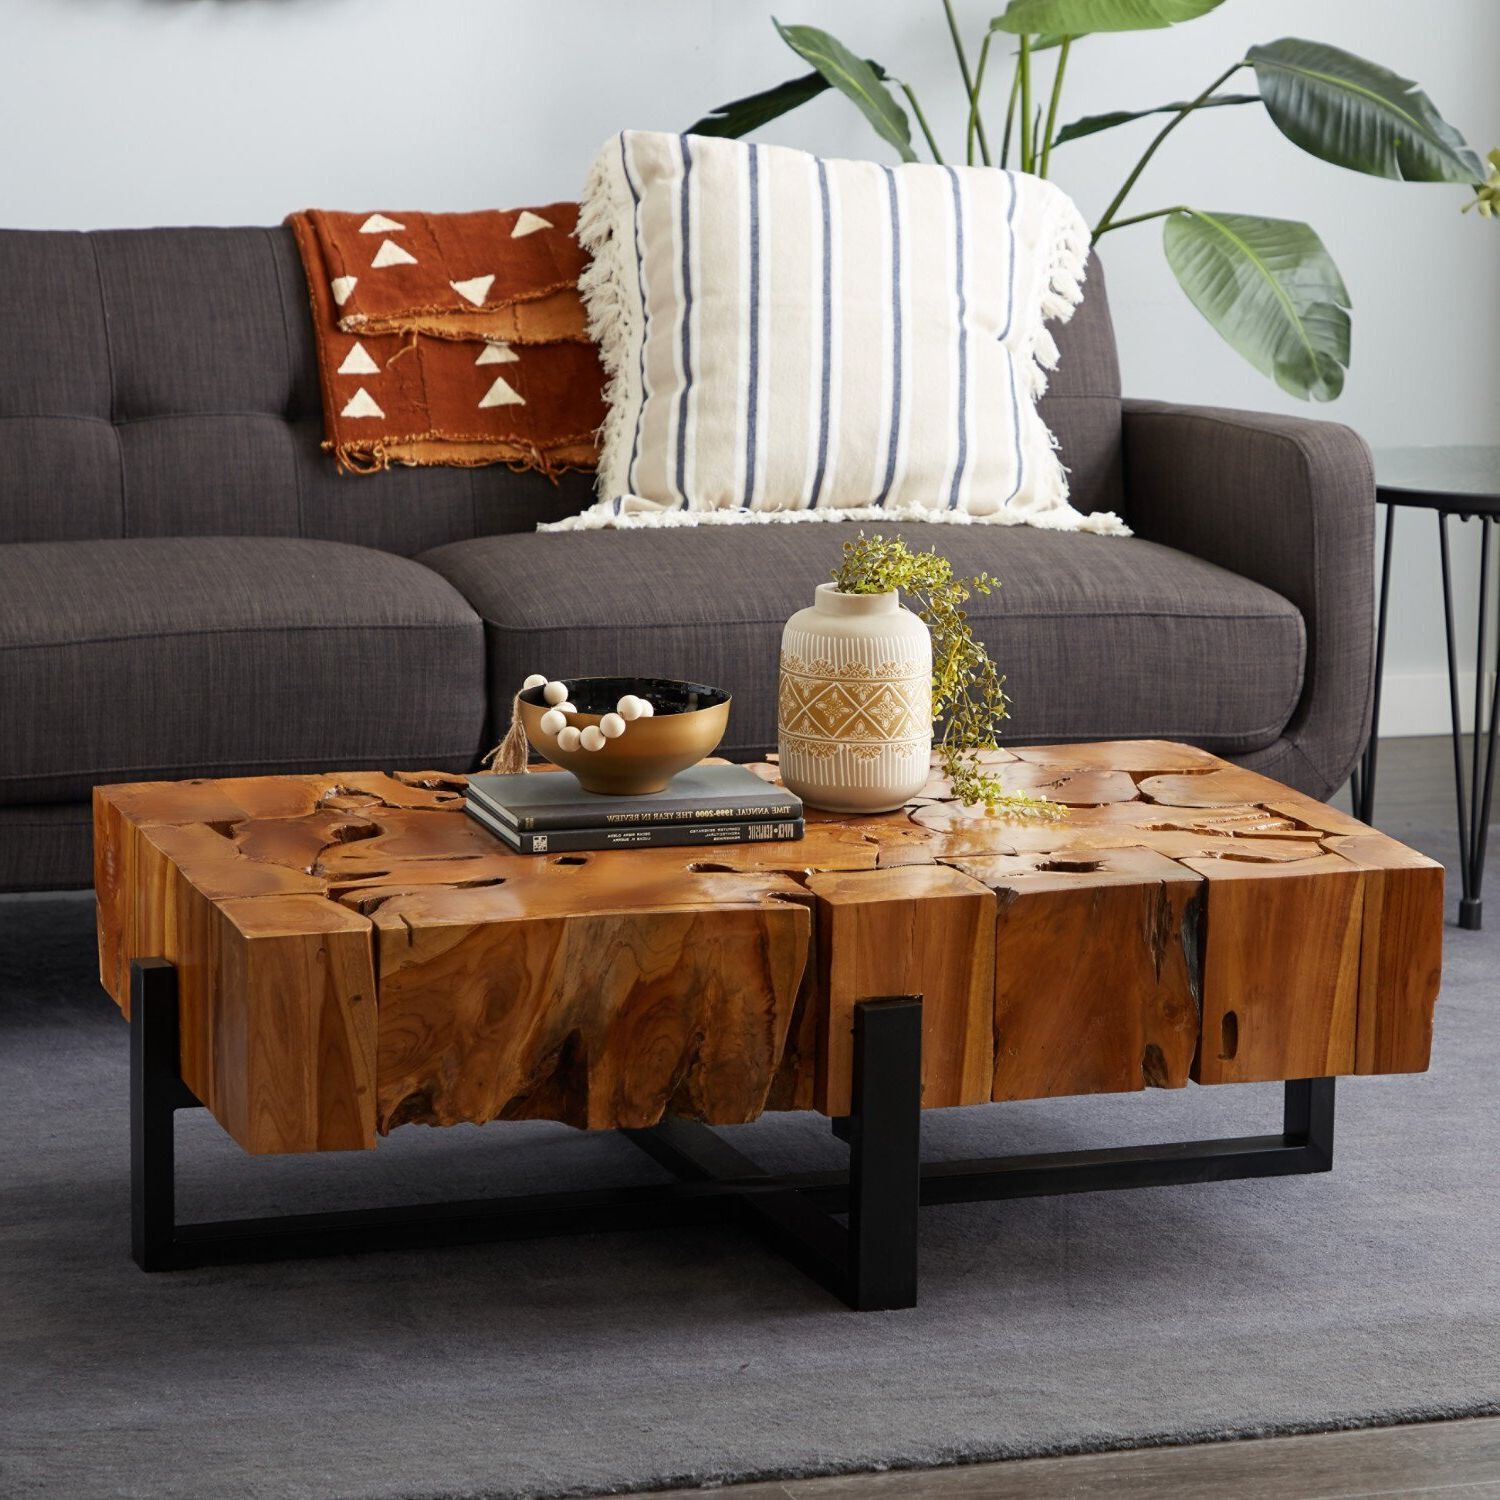 Teak Coffee Tables – Ideas On Foter Throughout Fashionable Solid Teak Wood Coffee Tables (View 15 of 20)